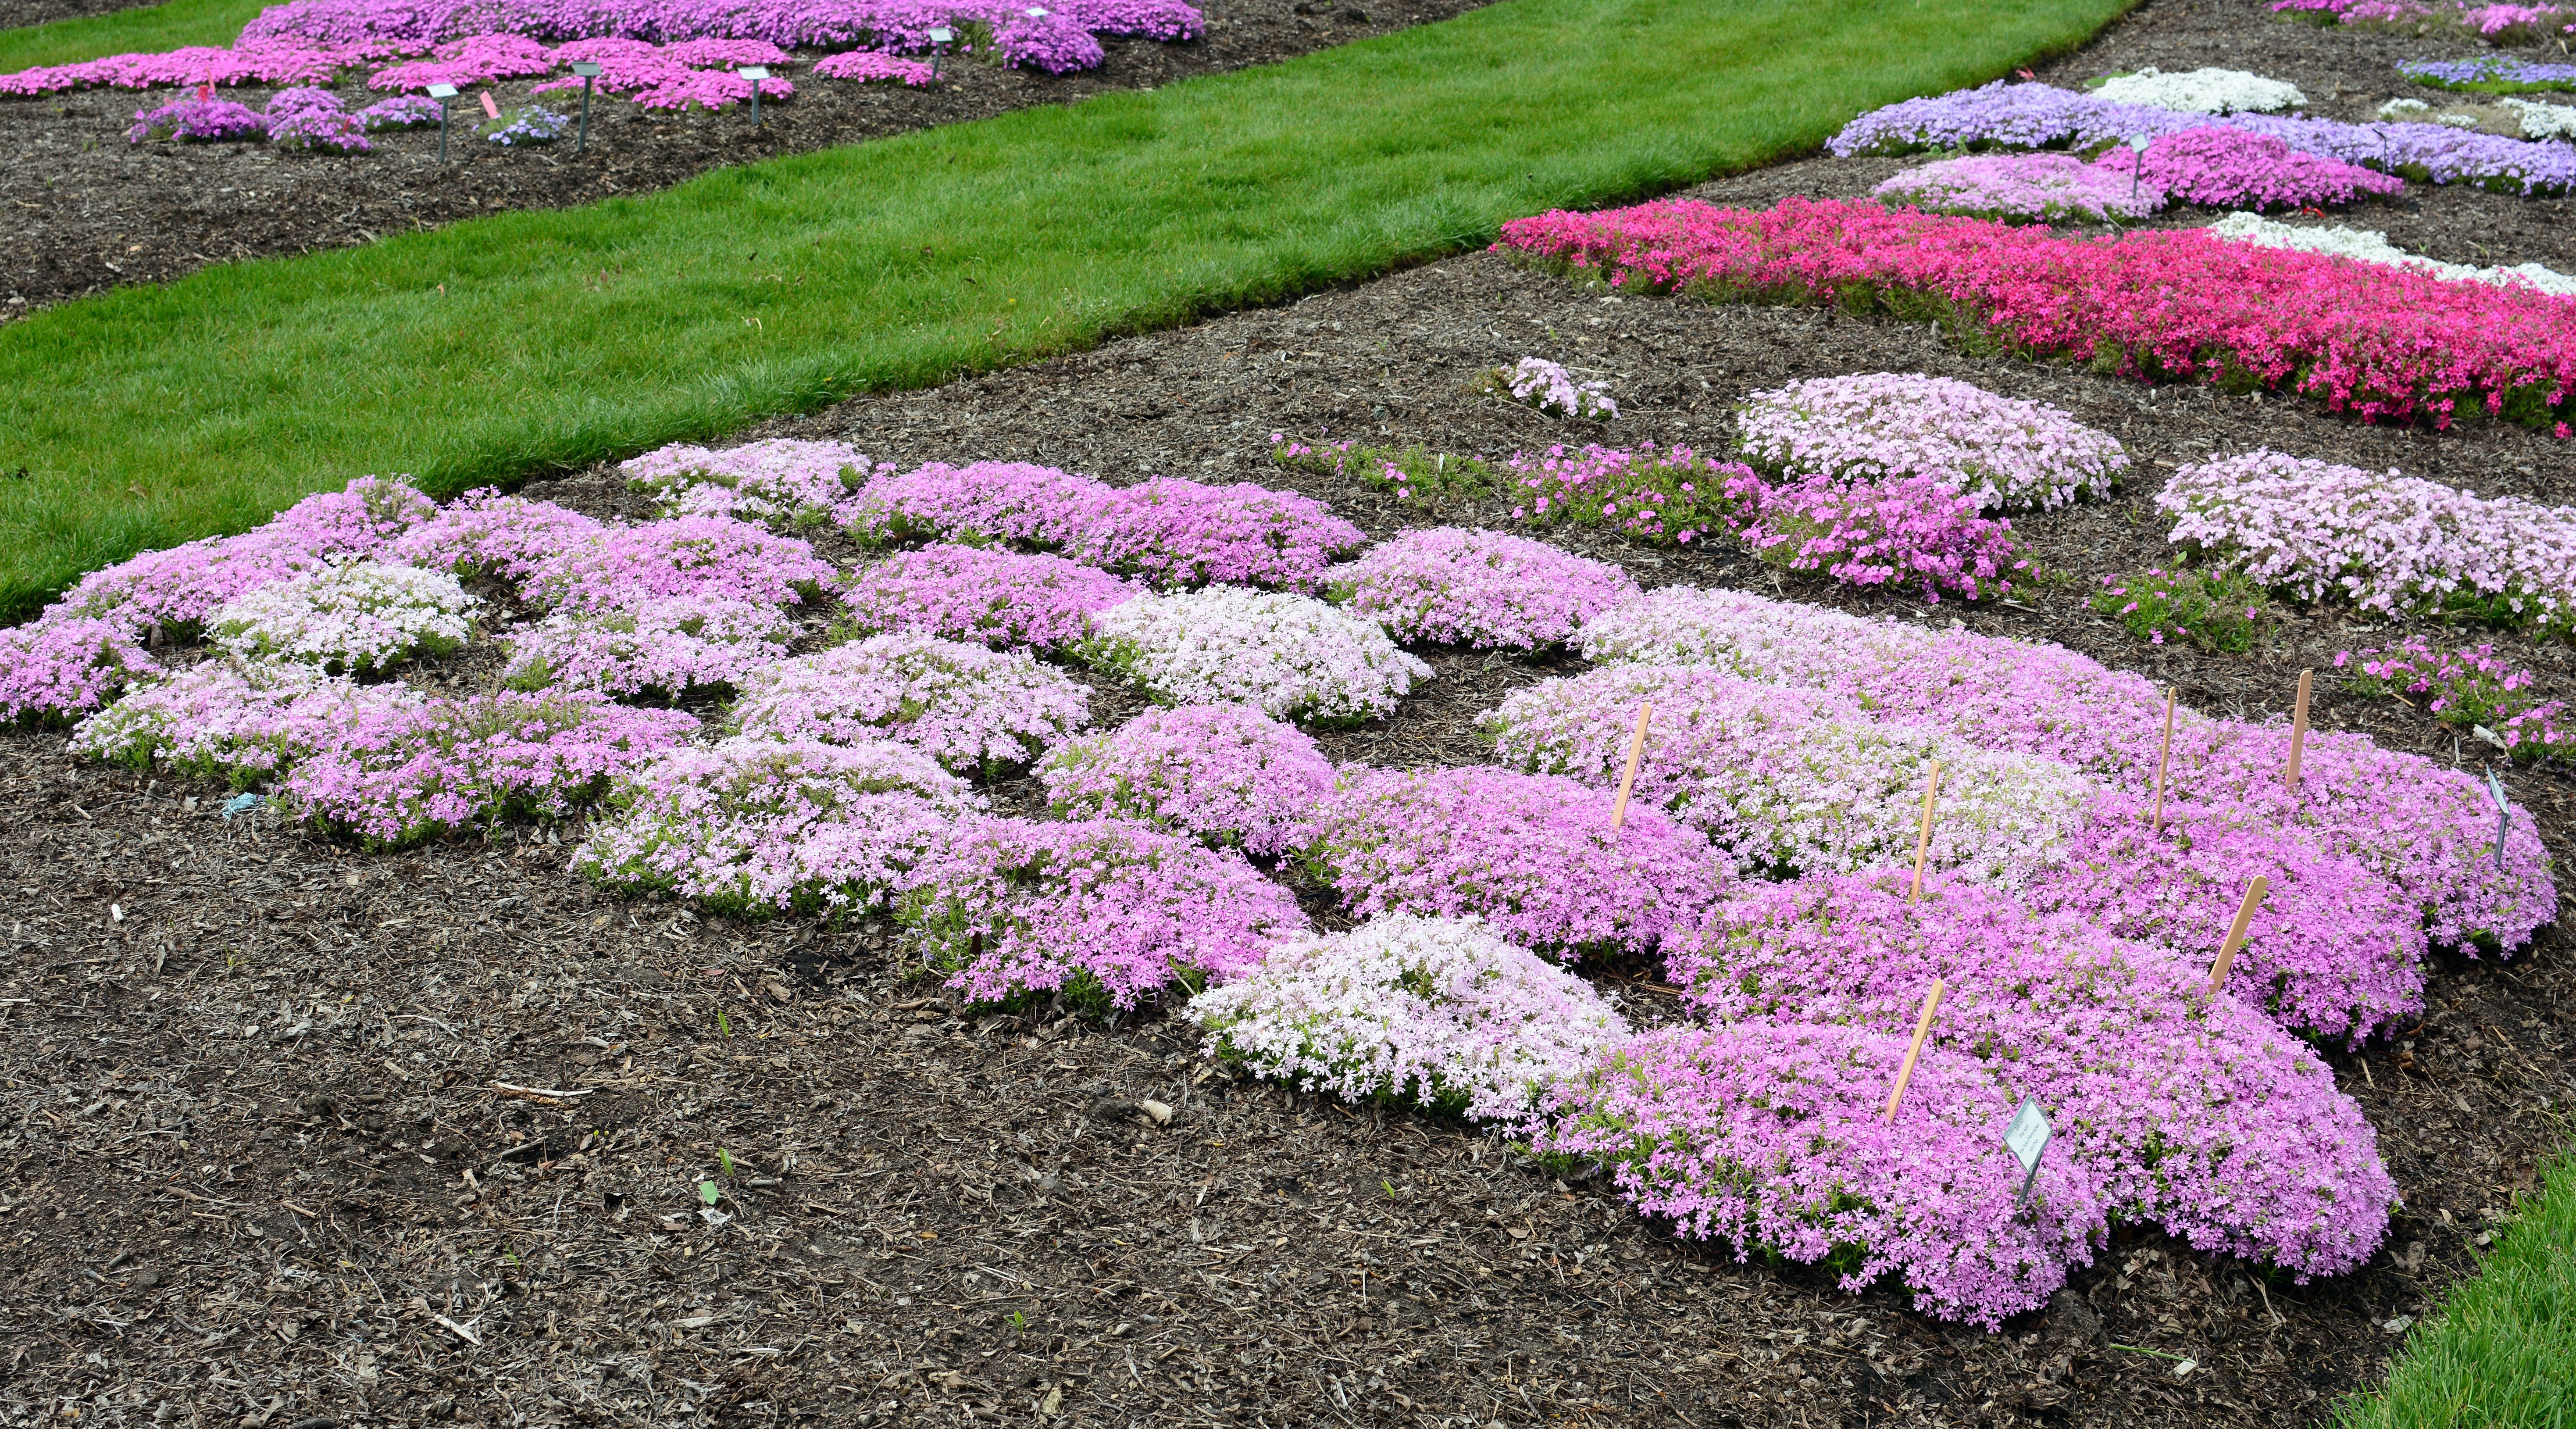 images/plants/phlox/phl-perfectly-puzzling/phl-perfectly-puzzling-0005.jpg